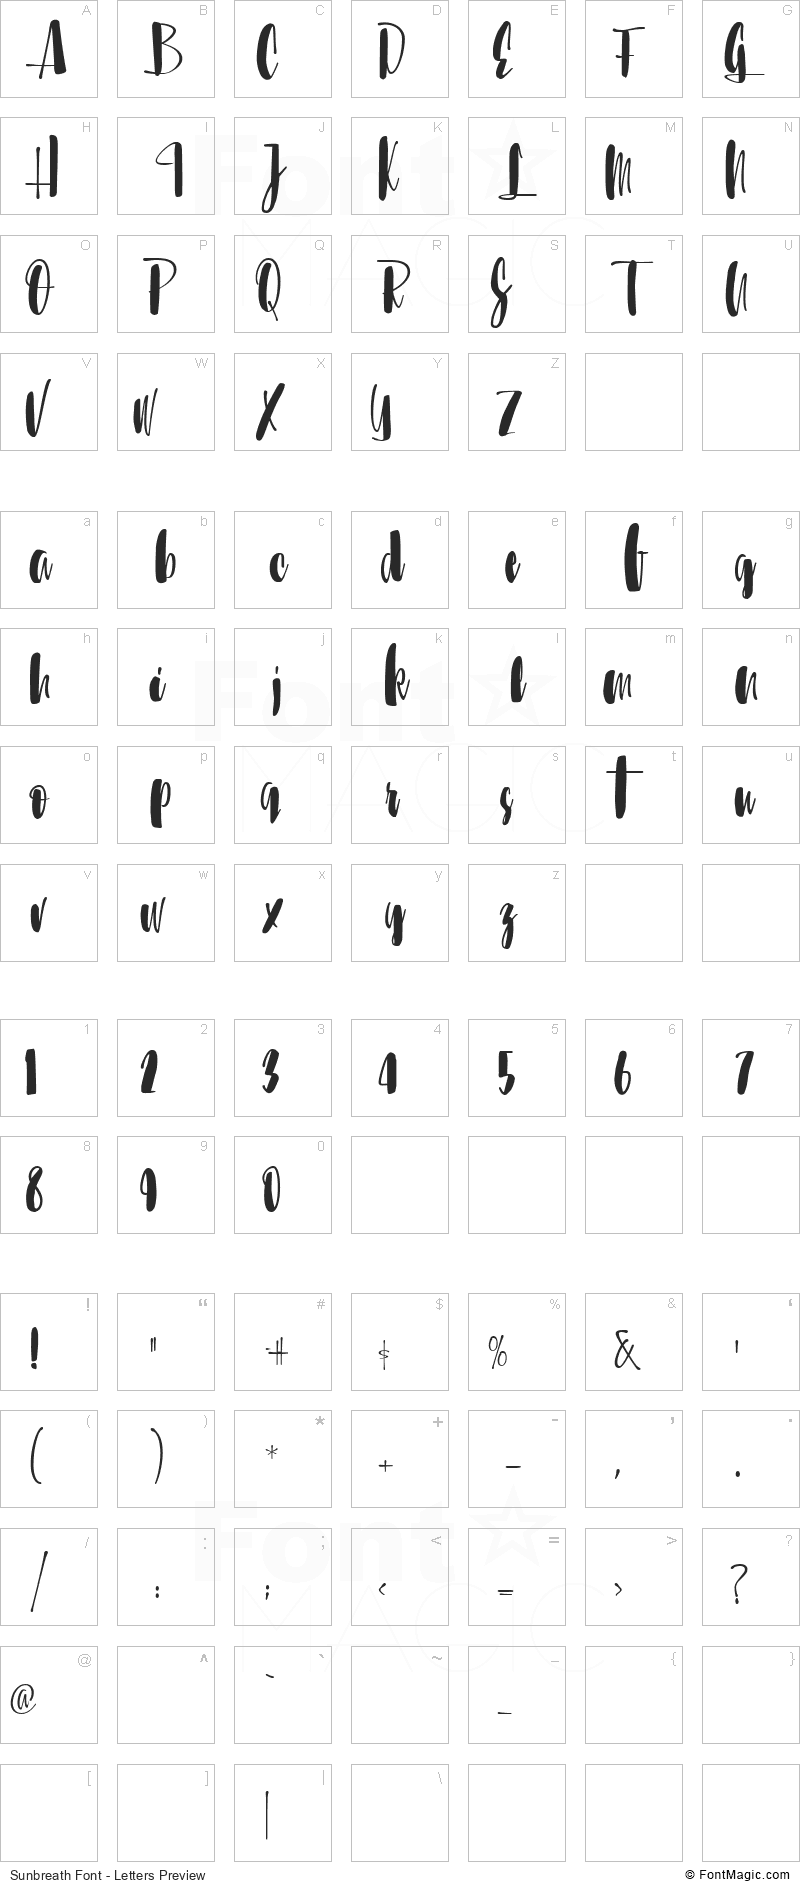 Sunbreath Font - All Latters Preview Chart